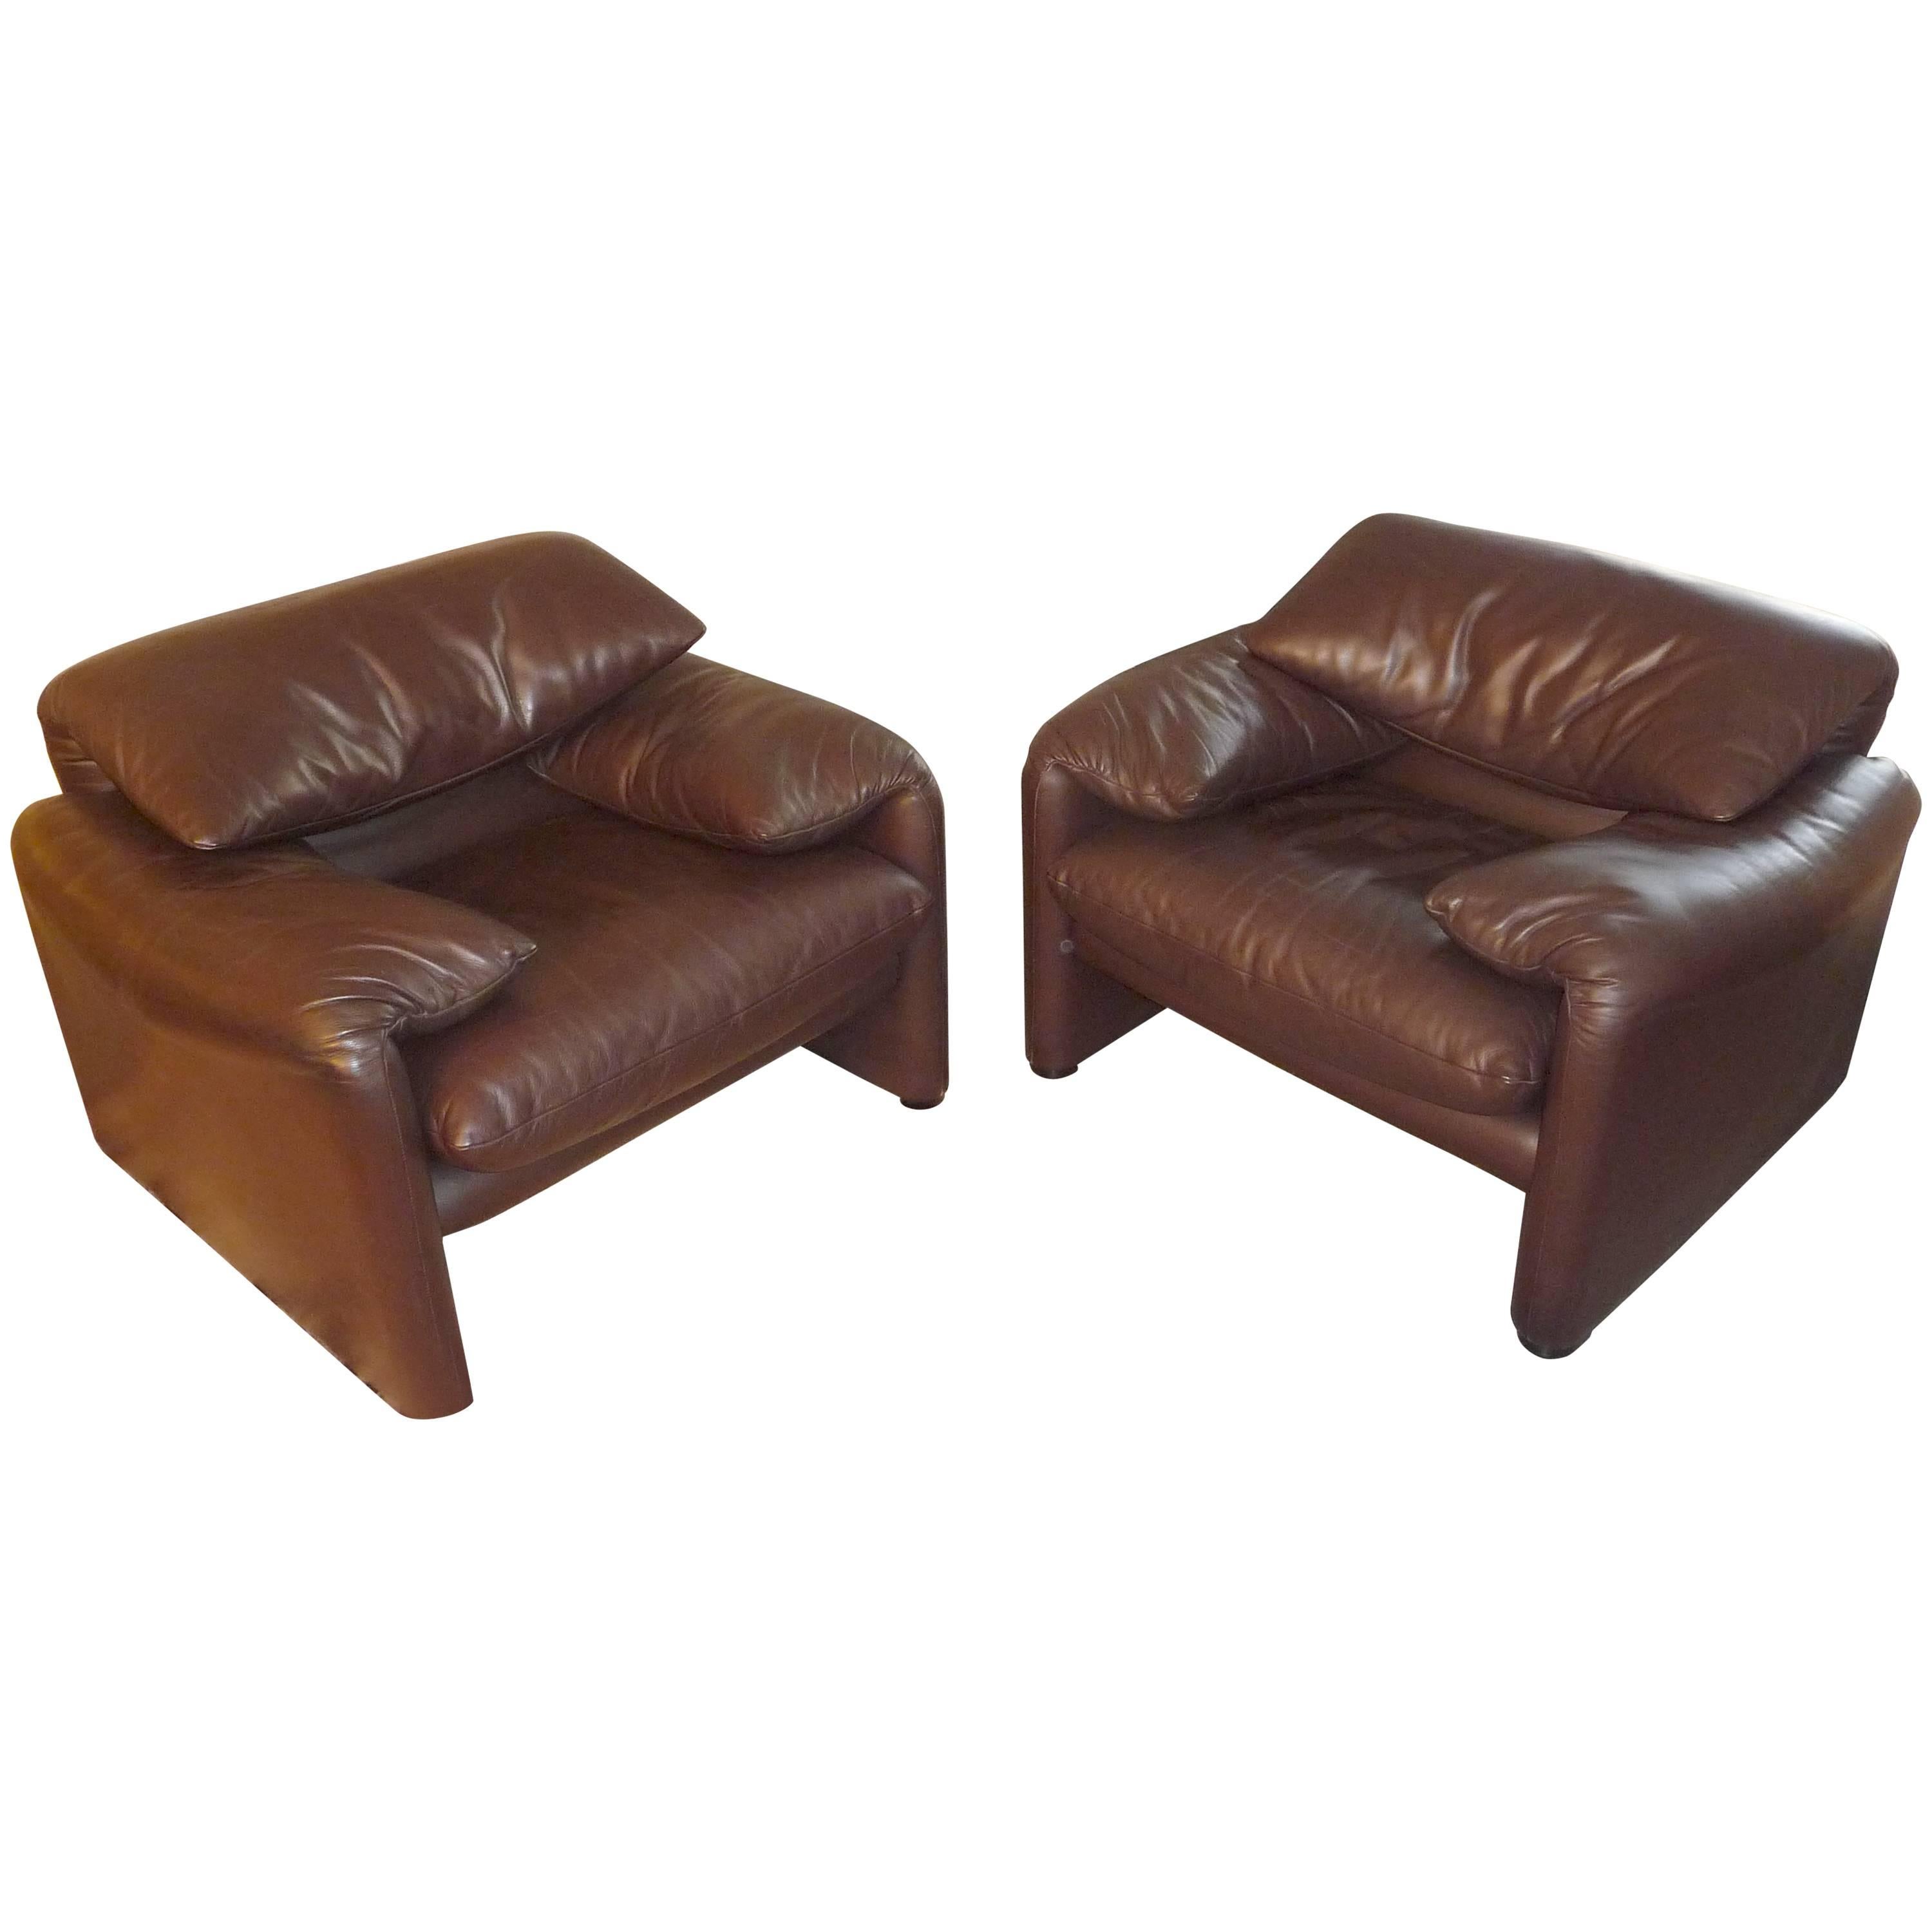 Pair of Armchairs 675  Maralunga Cassina Designed by Vico Magistretti in 1973 For Sale